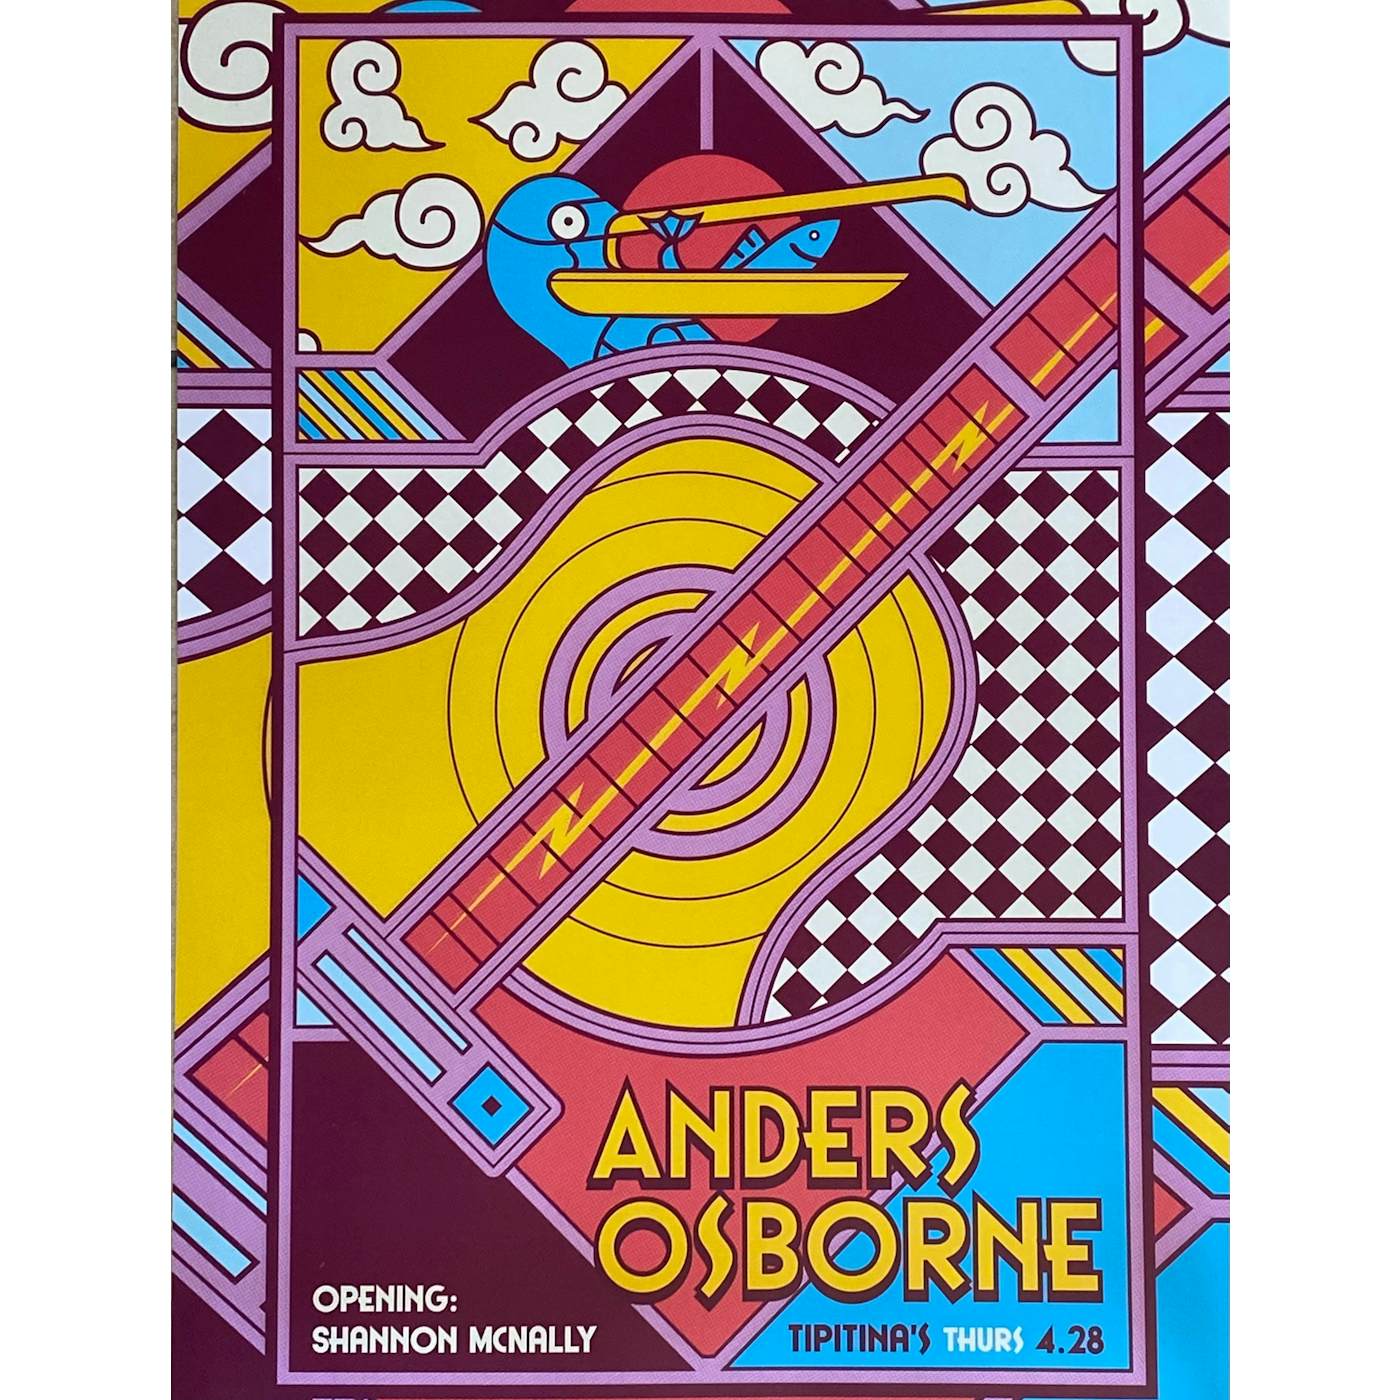 Anders Osborne Jazz Fest 2022 at Tipitina's Poster